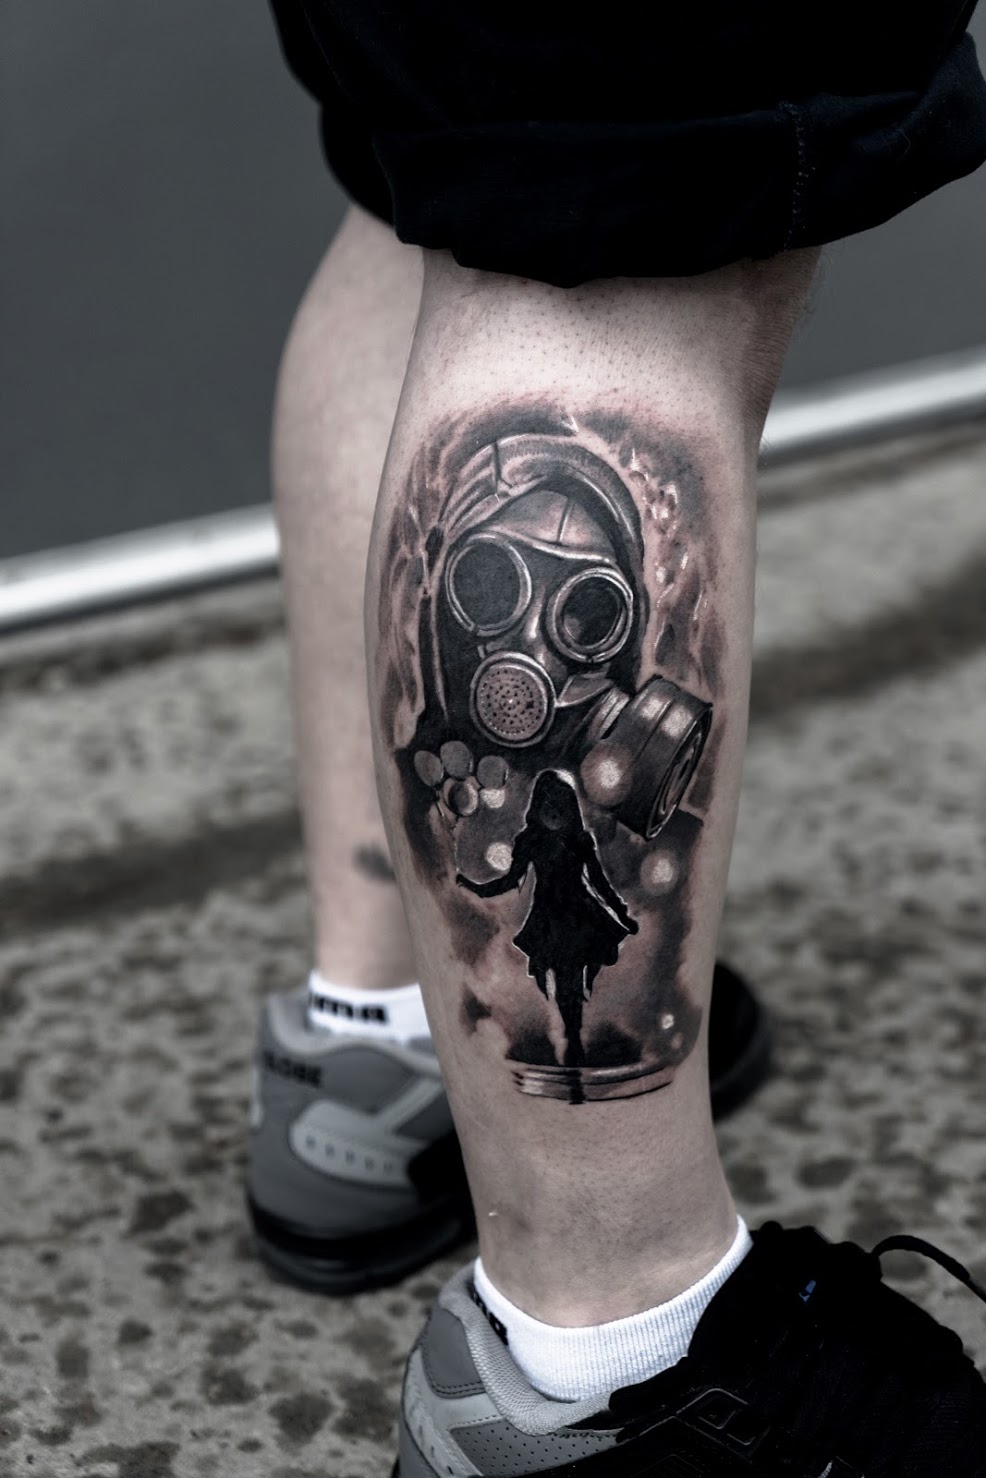 Photorealistic tattoo by Scoot Ink